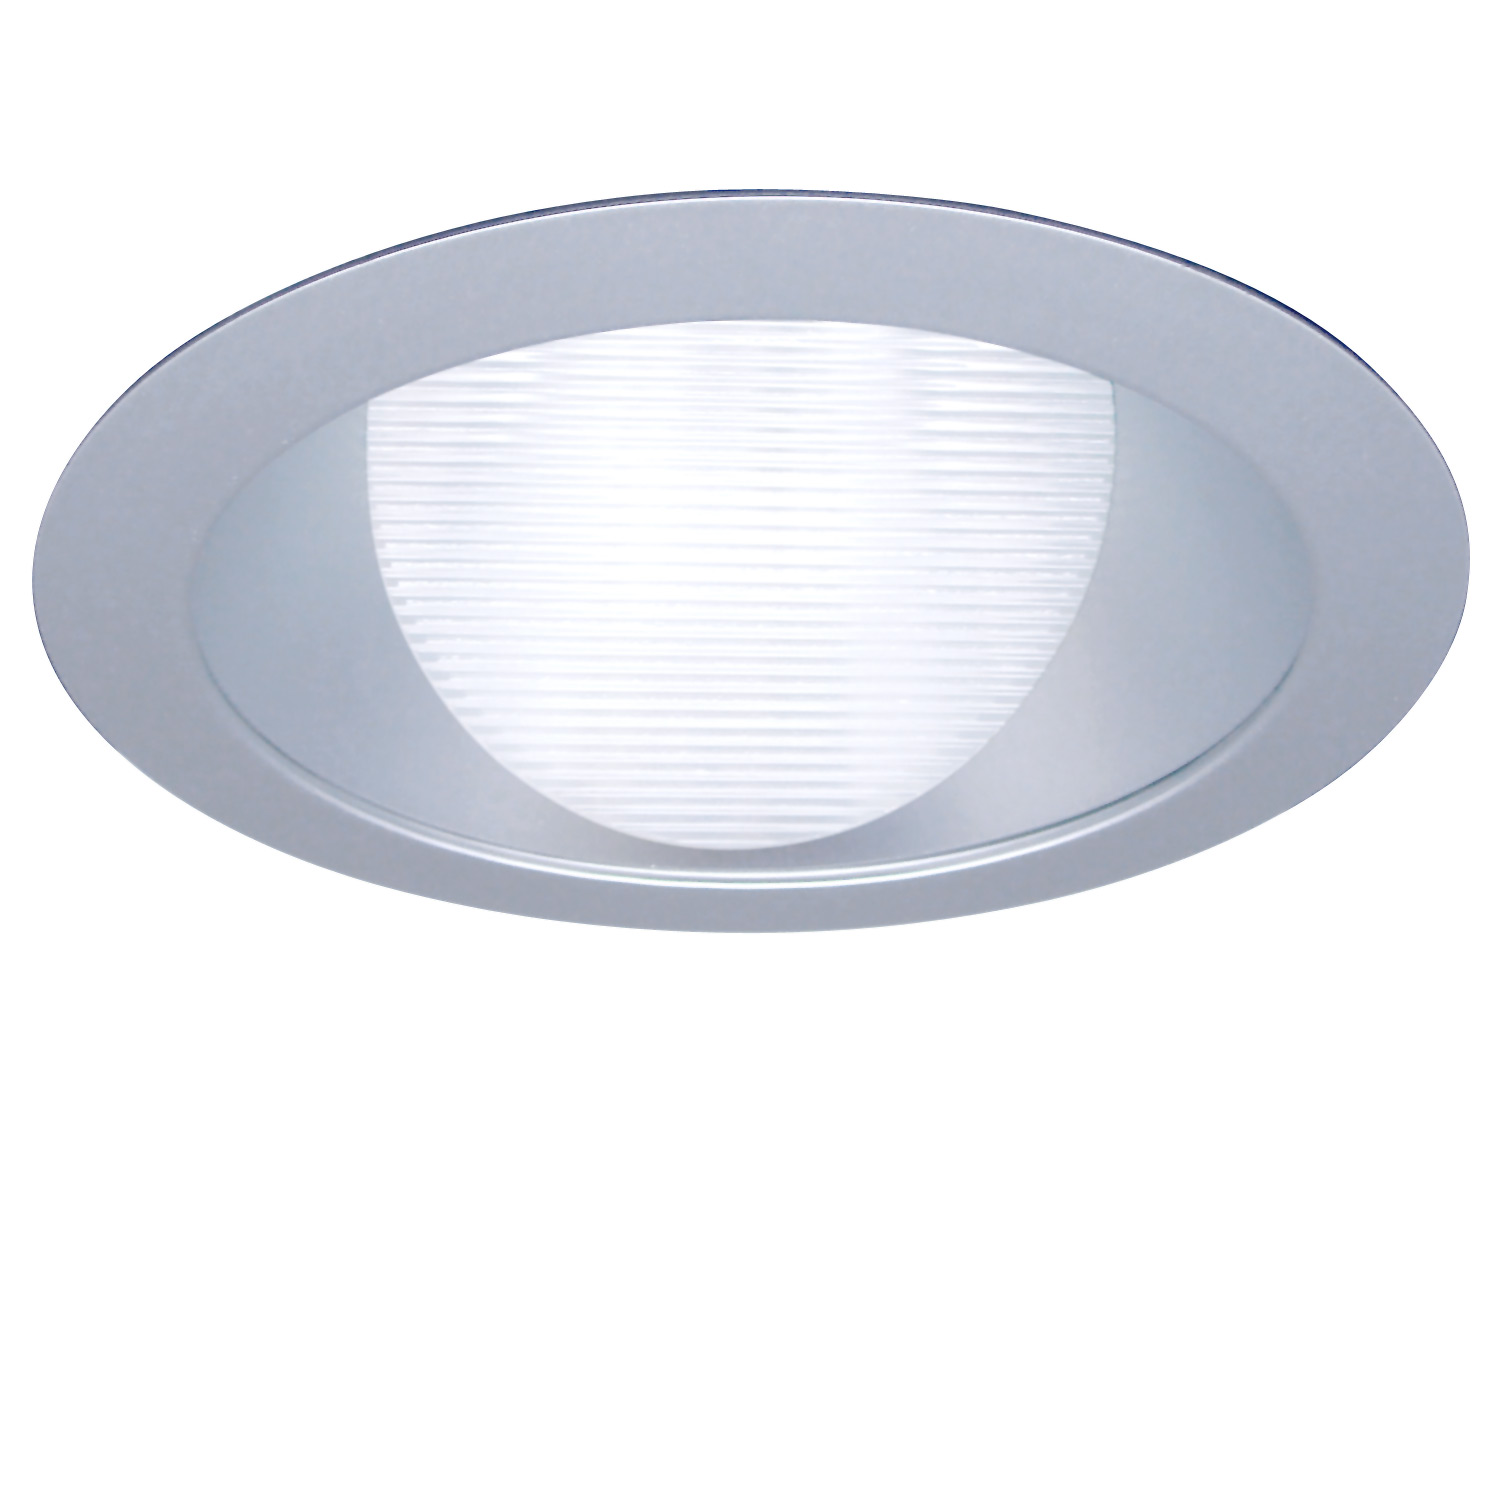 Product image for R6 Series Lensed Wall Wash Reflector